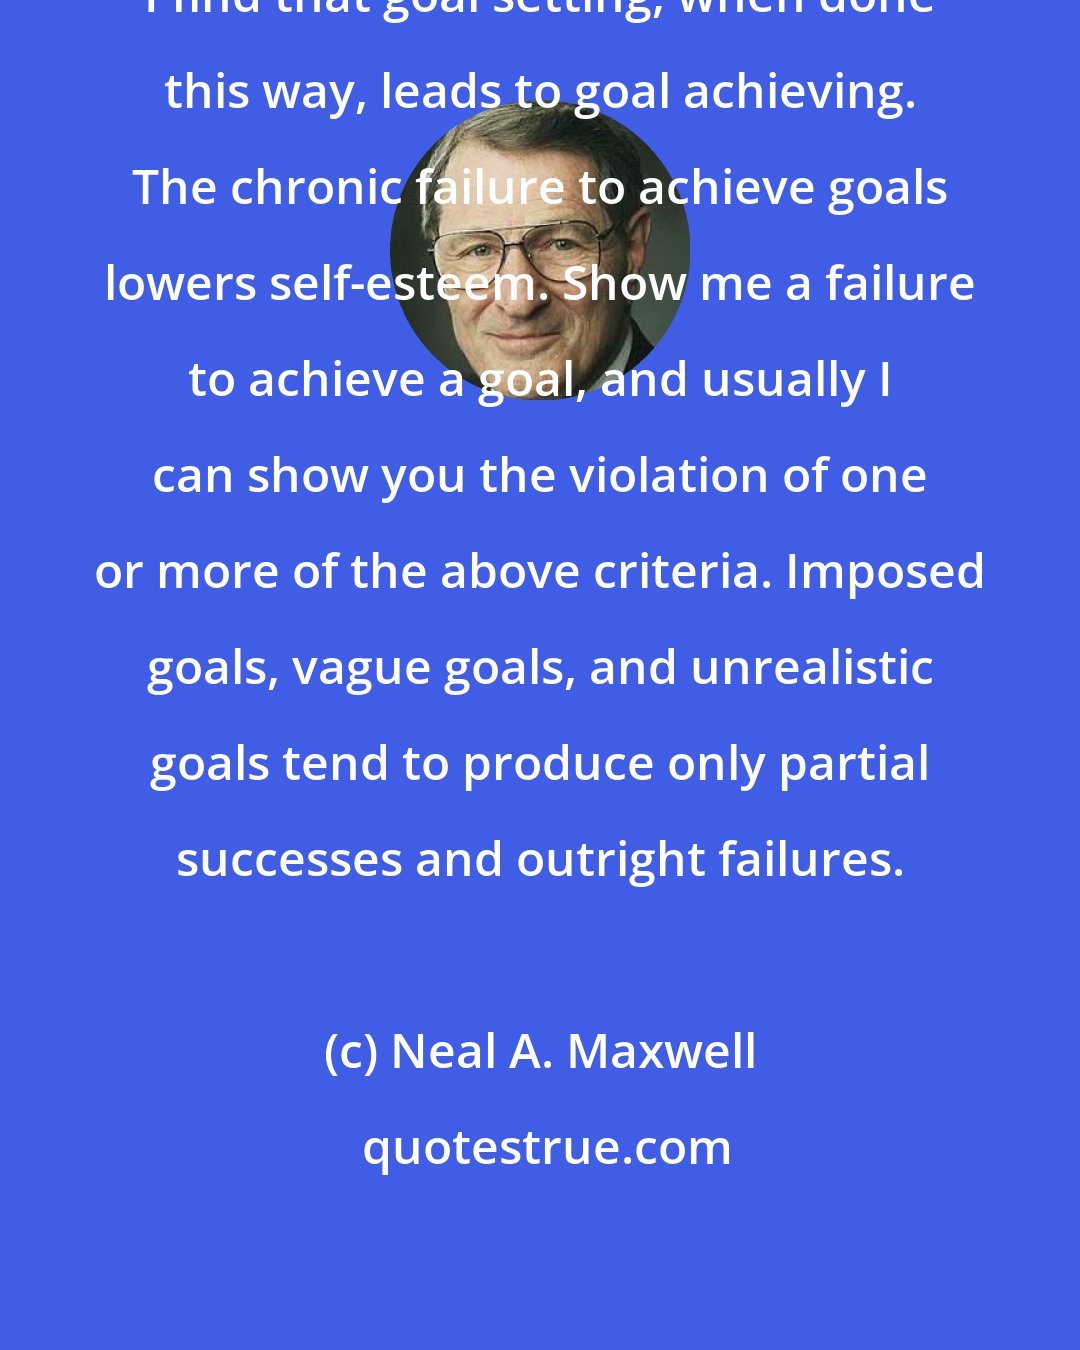 Neal A. Maxwell: I find that goal setting, when done this way, leads to goal achieving. The chronic failure to achieve goals lowers self-esteem. Show me a failure to achieve a goal, and usually I can show you the violation of one or more of the above criteria. Imposed goals, vague goals, and unrealistic goals tend to produce only partial successes and outright failures.